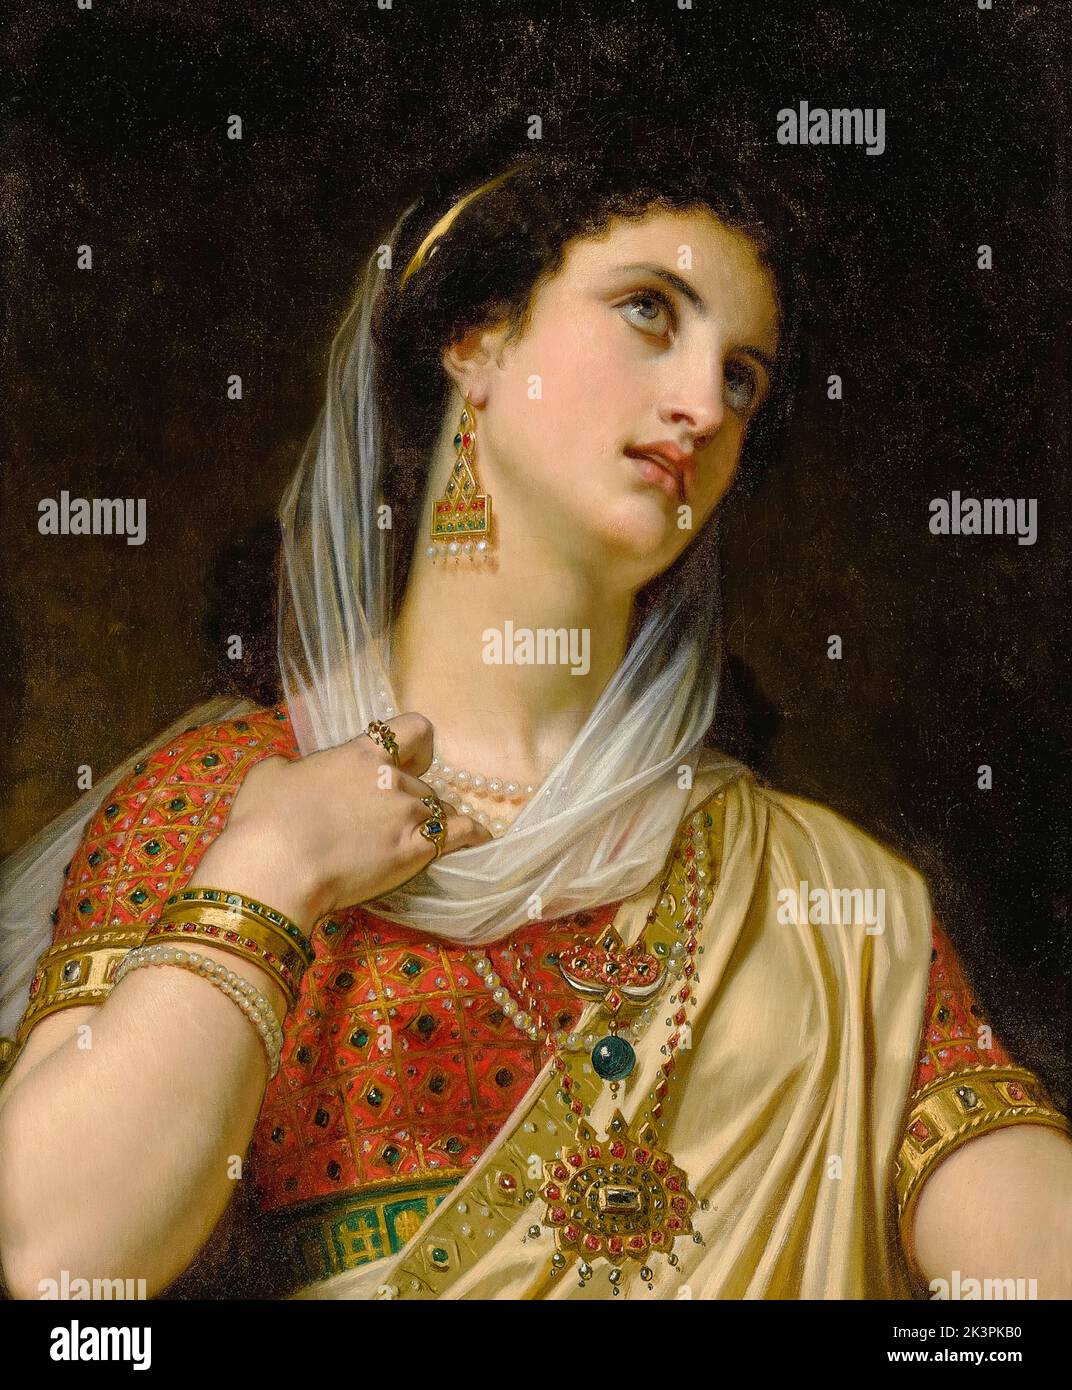 Queen Esther (of Persia and Medes), portrait painting in oil on masonite by Hugues Merle, 1875 Stock Photo